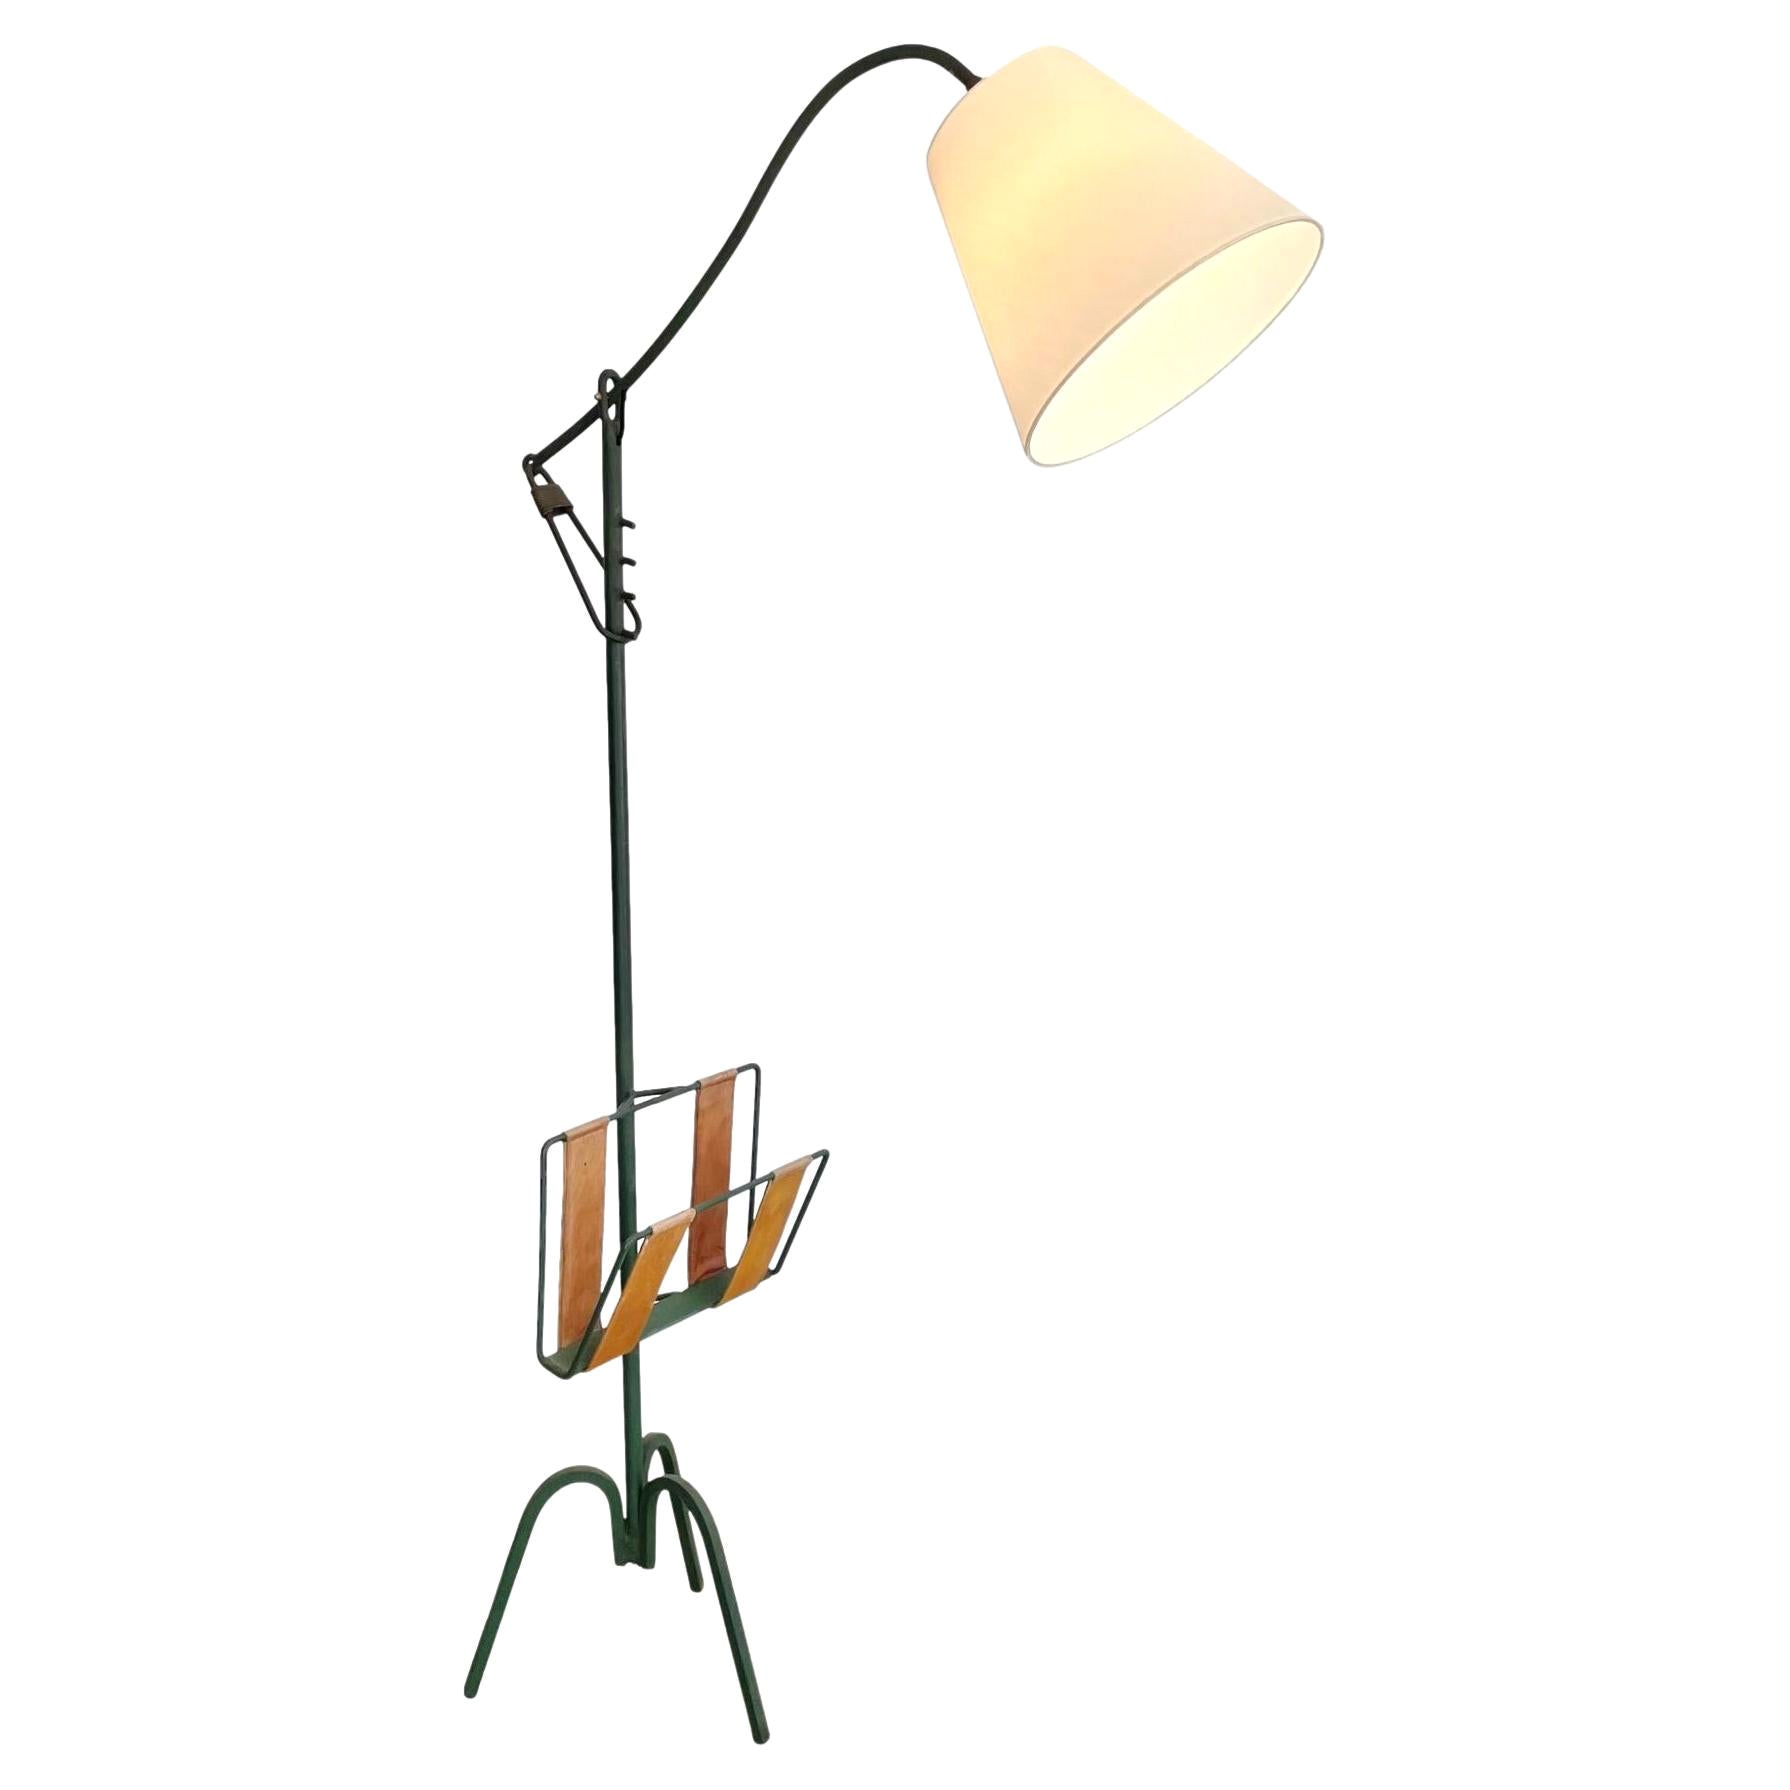 Adjustable Iron Floor Lamp in the style of Jacques Adnet, 1950s France For Sale